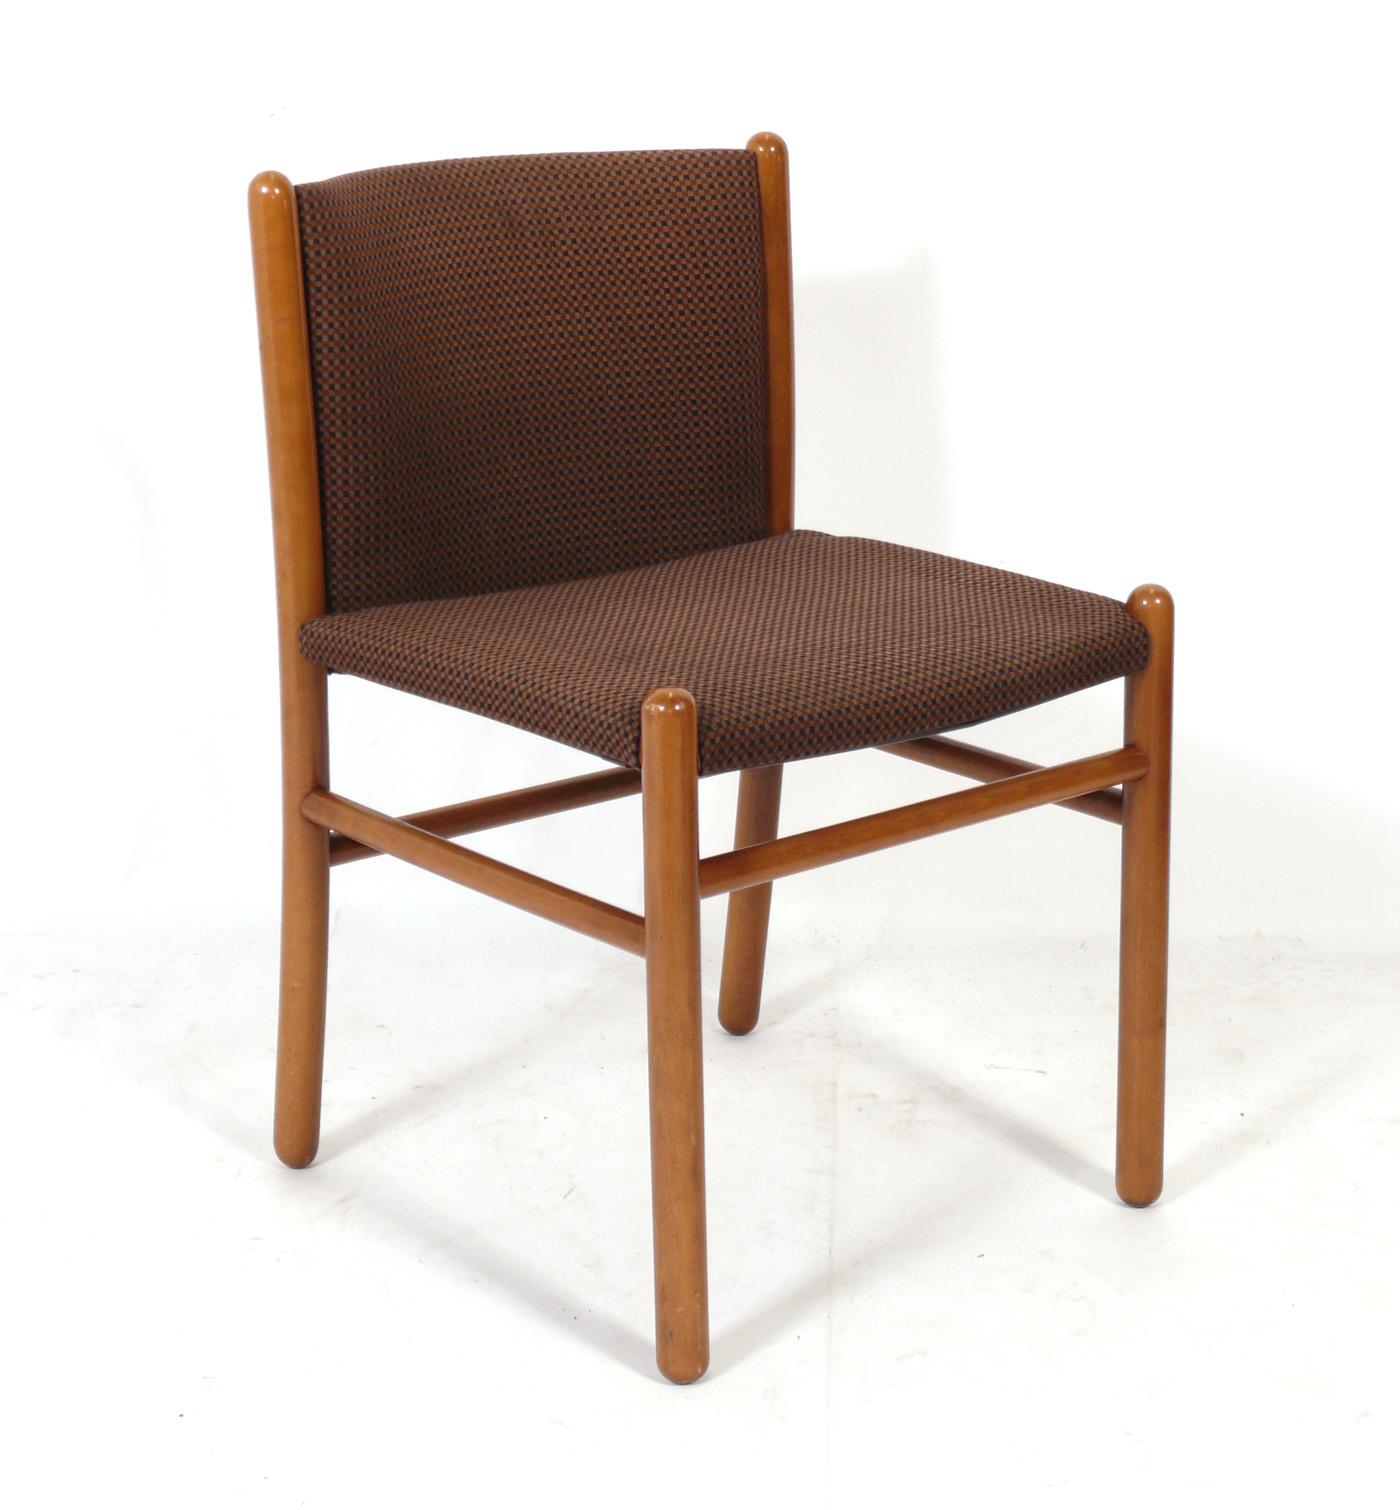 Set of Four Clean Lined Italian Dining Chairs, designed by Gianfranco Frattini for Lema S.P.A., Italian, circa 1960s. The chairs are currently being reupholstered and can be completed in your fabric. Simply send us 10 yards of your fabric after